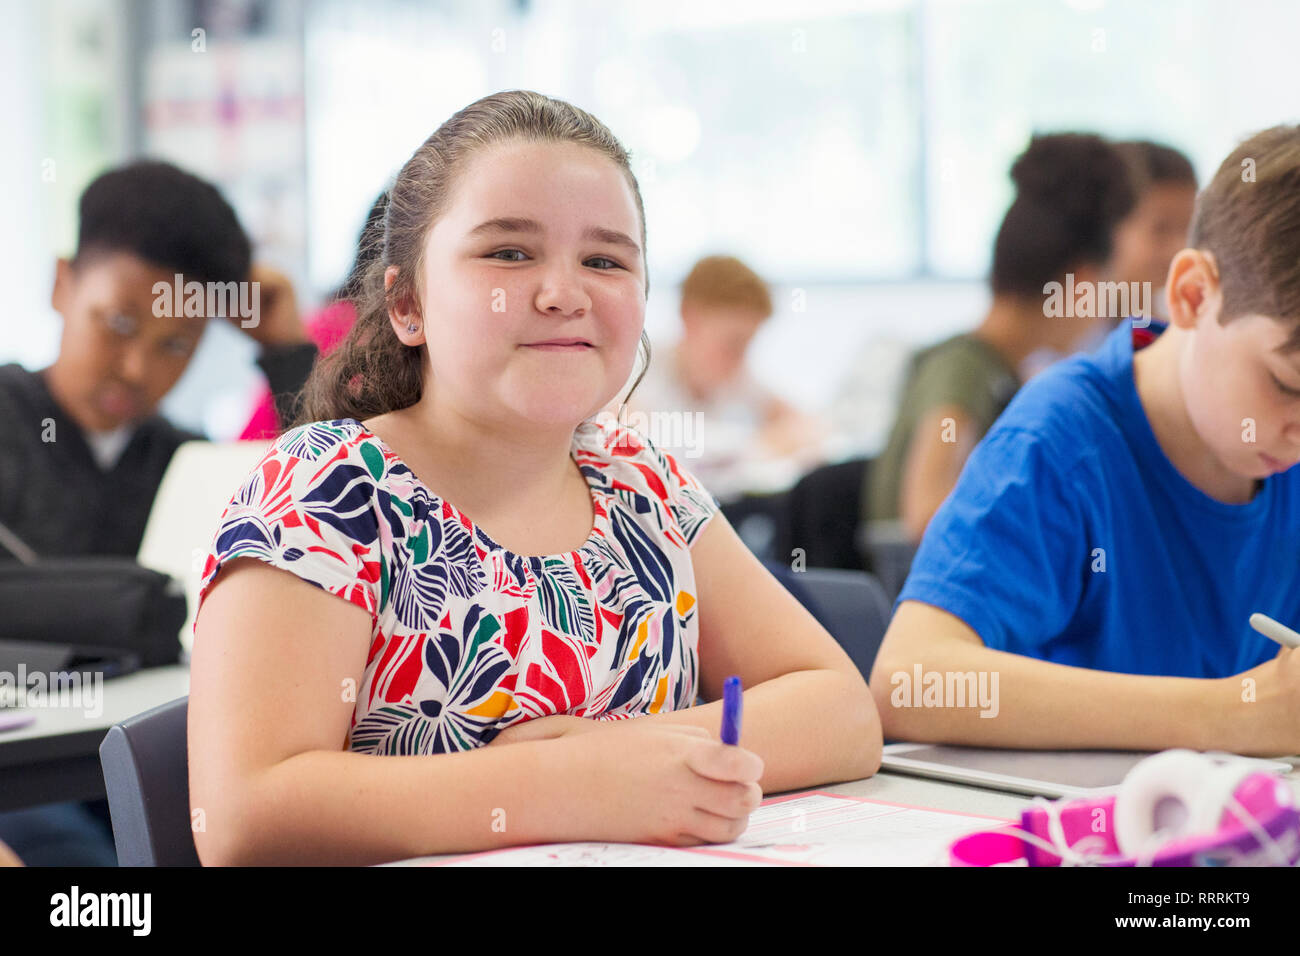 Portrait smiling, confident junior high school girl studying in classroom Stock Photo